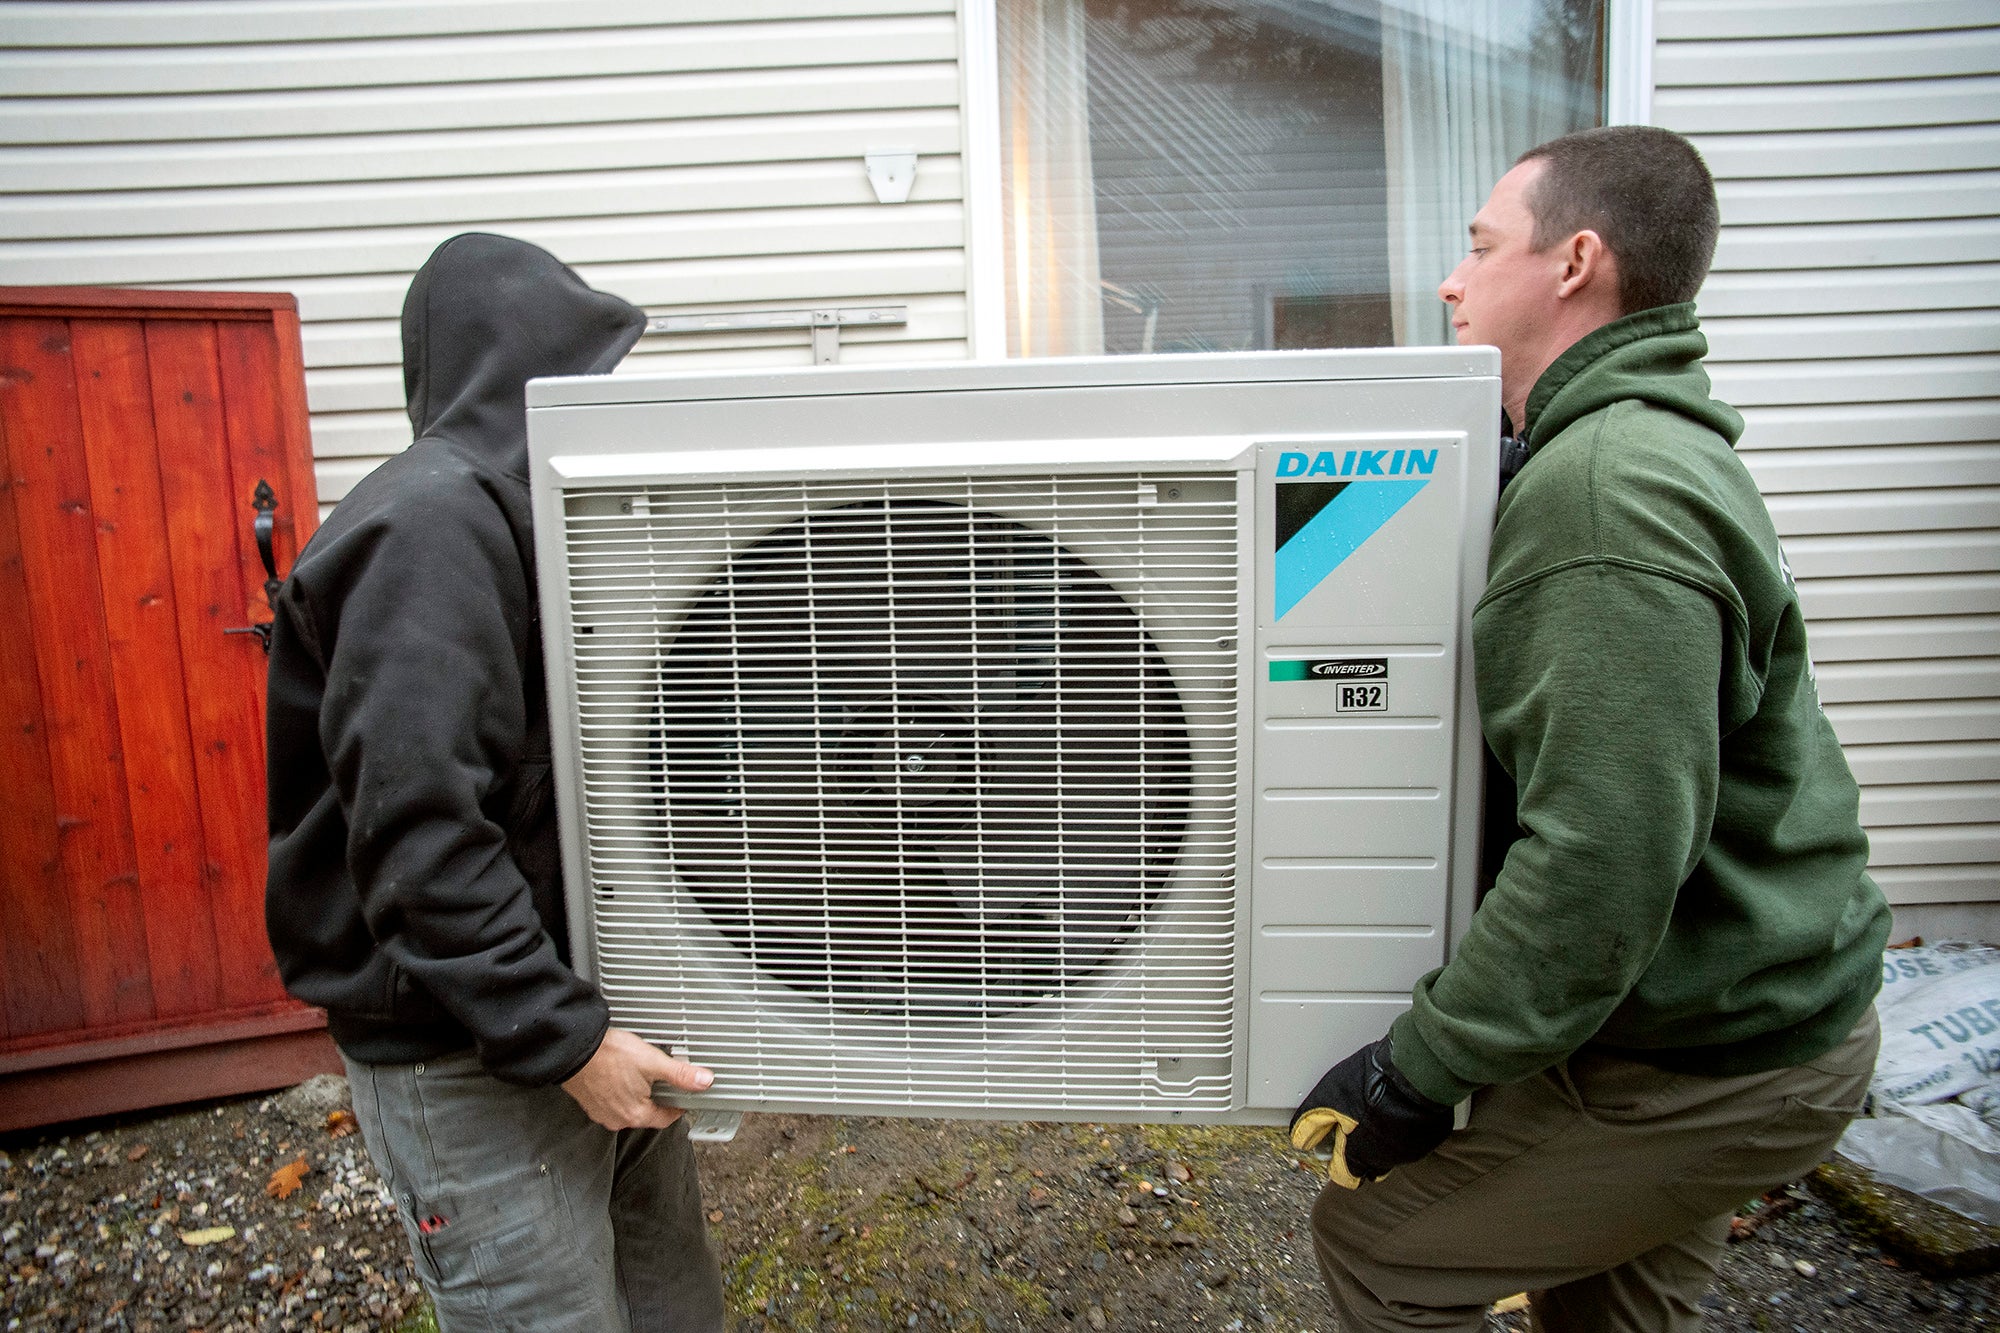 Two men lift a piece of HVAC equipment into place outside of a home.